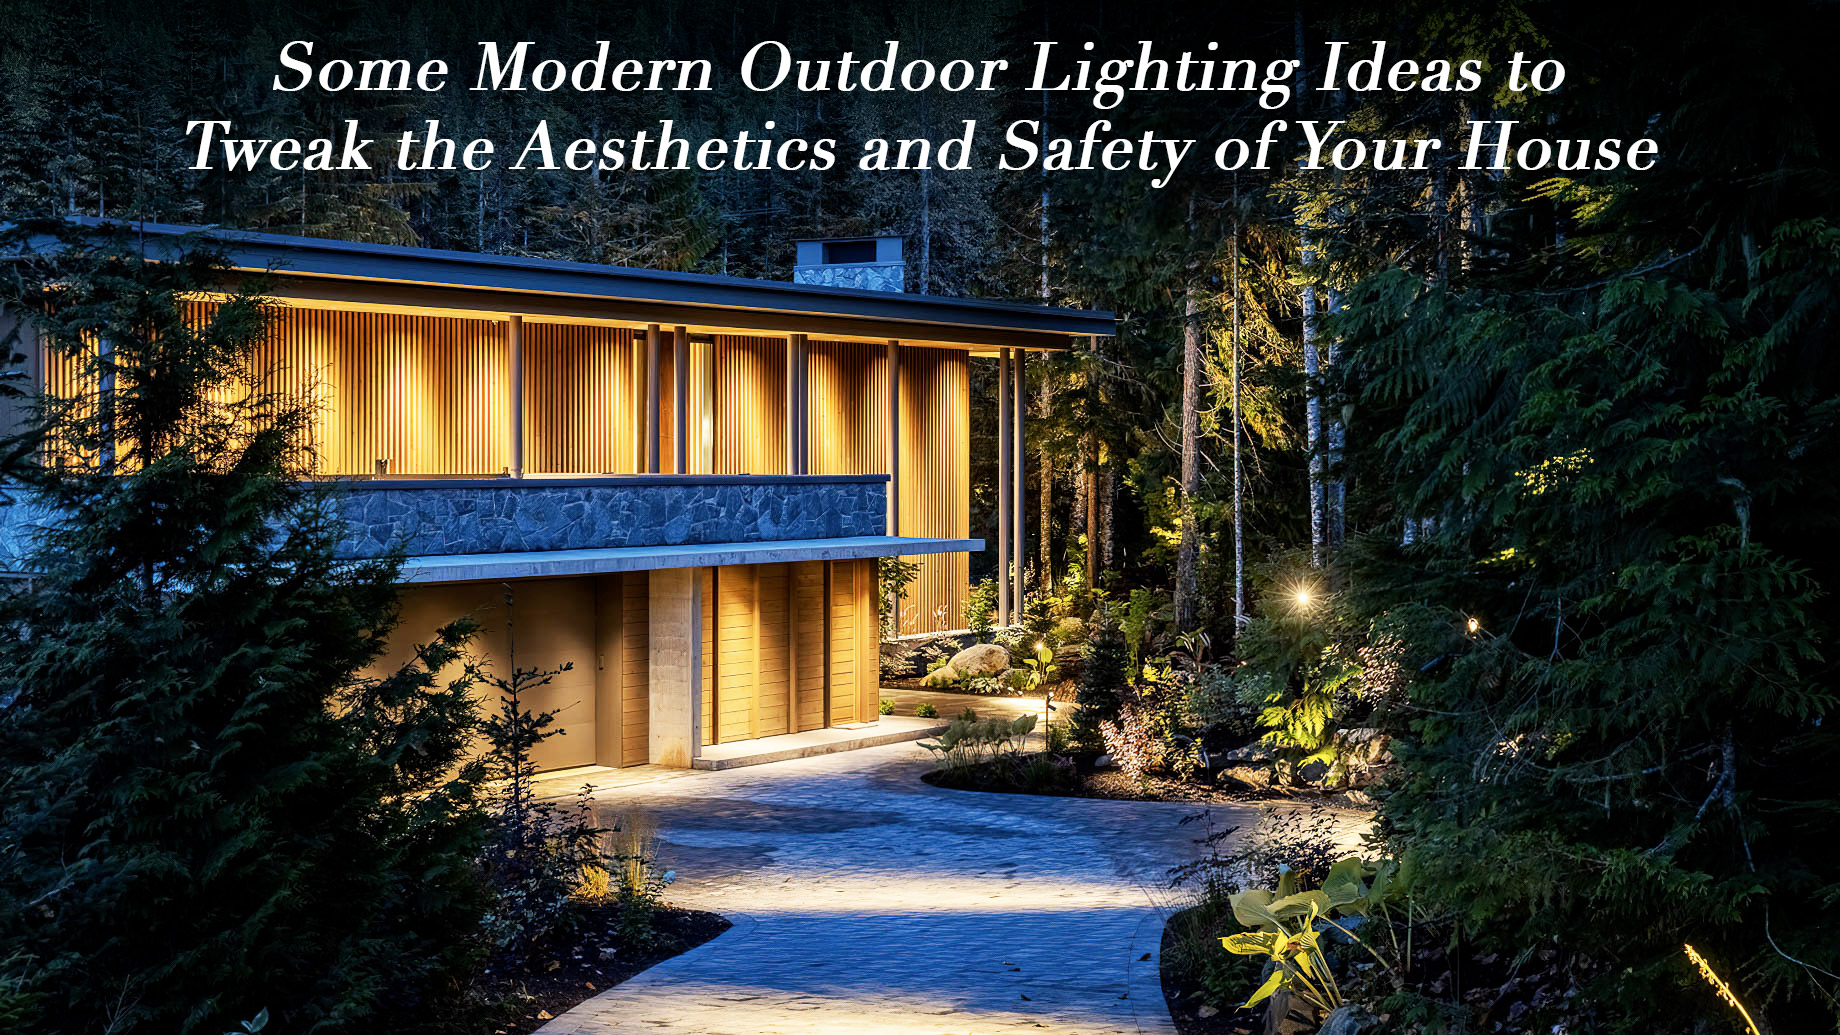 Some Modern Outdoor Lighting Ideas to Tweak the Aesthetics and Safety of Your House